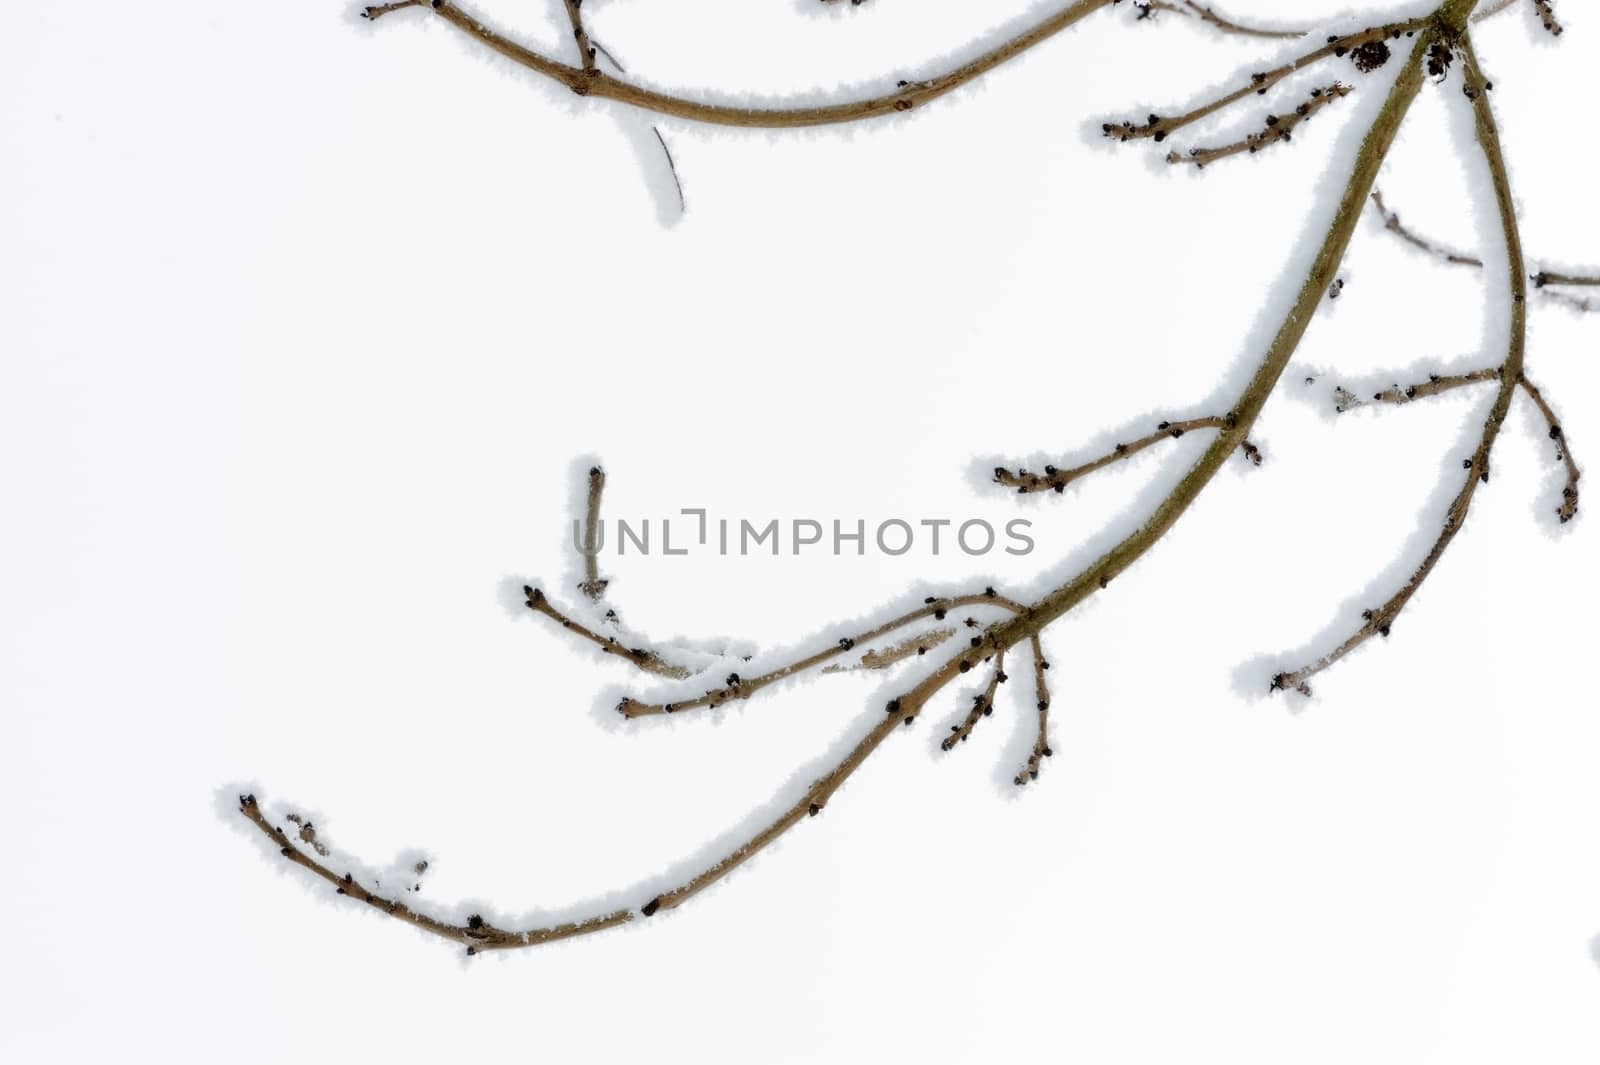 Branch of tree in winter covered in snow